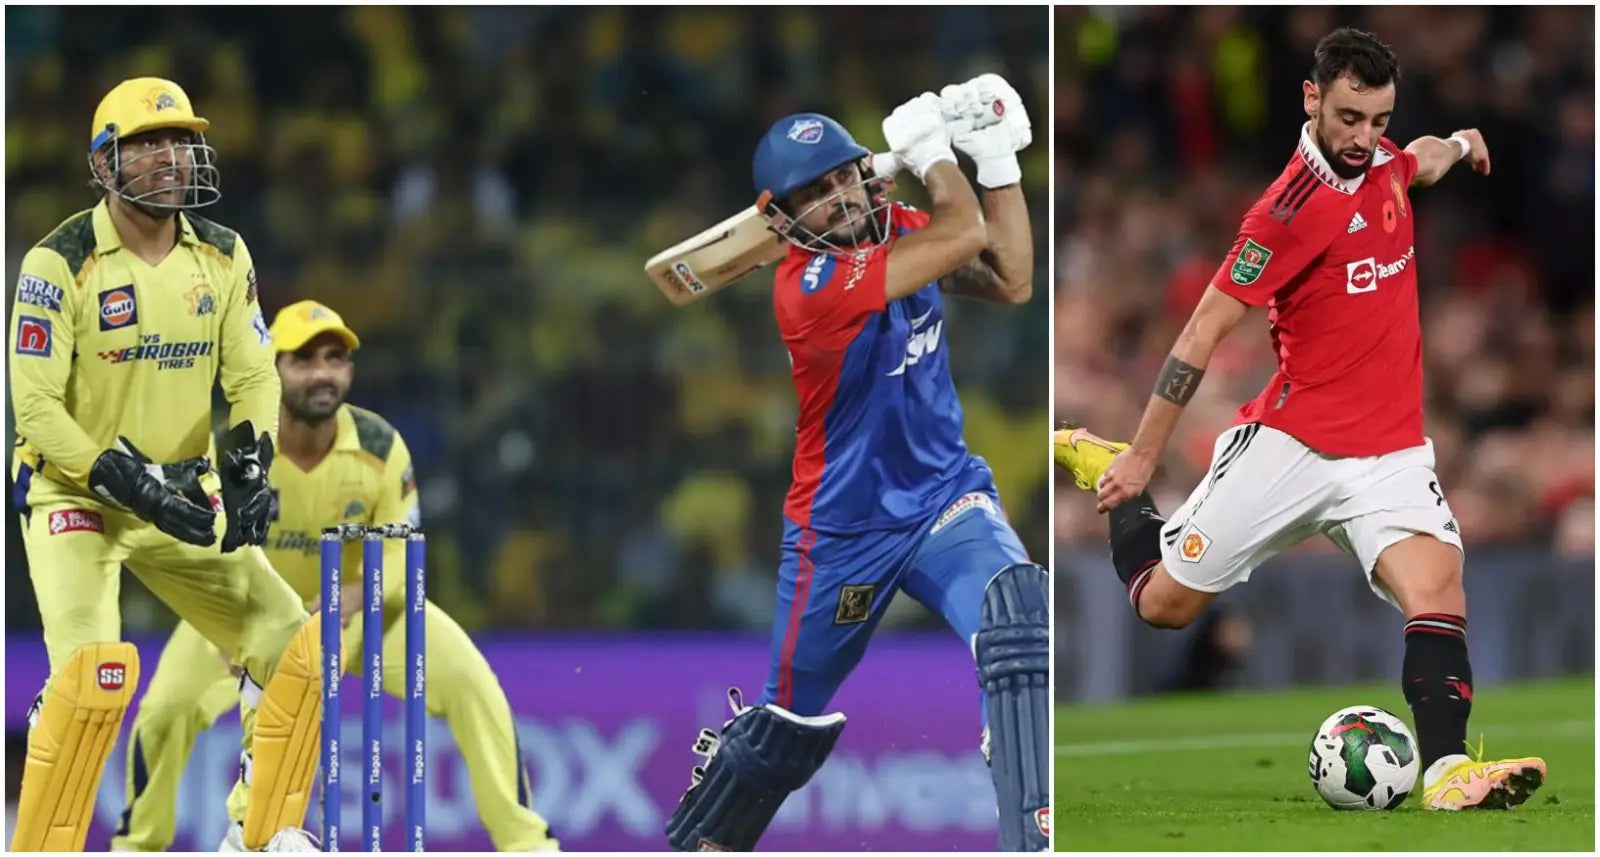 A collage of two images: Manish Pandey plays a shot in an IPL match with MS Dhoni wicket keeping behind the stumps on the left and Bruno Fernandes of Manchester United kicks a ball in a Premier League Match